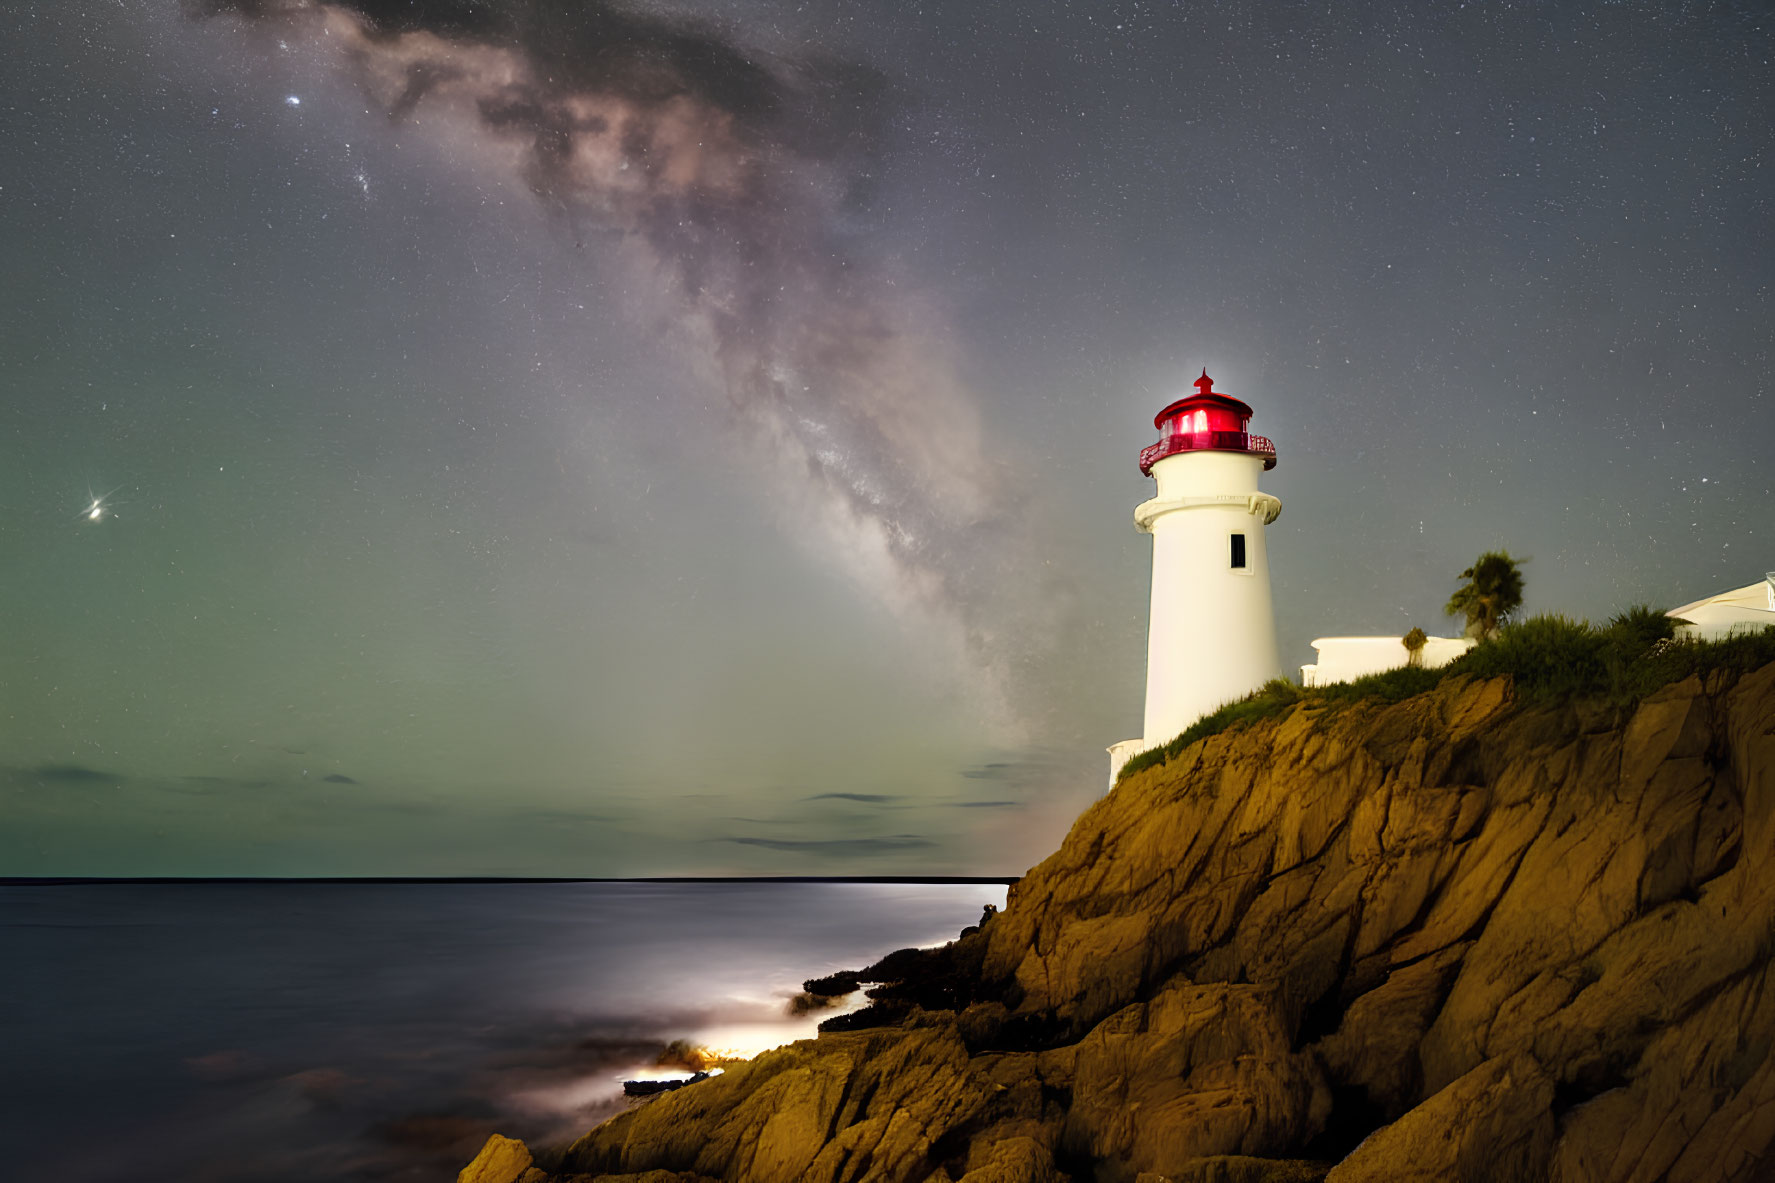 Red-topped lighthouse on cliff with starry sky and Milky Way view